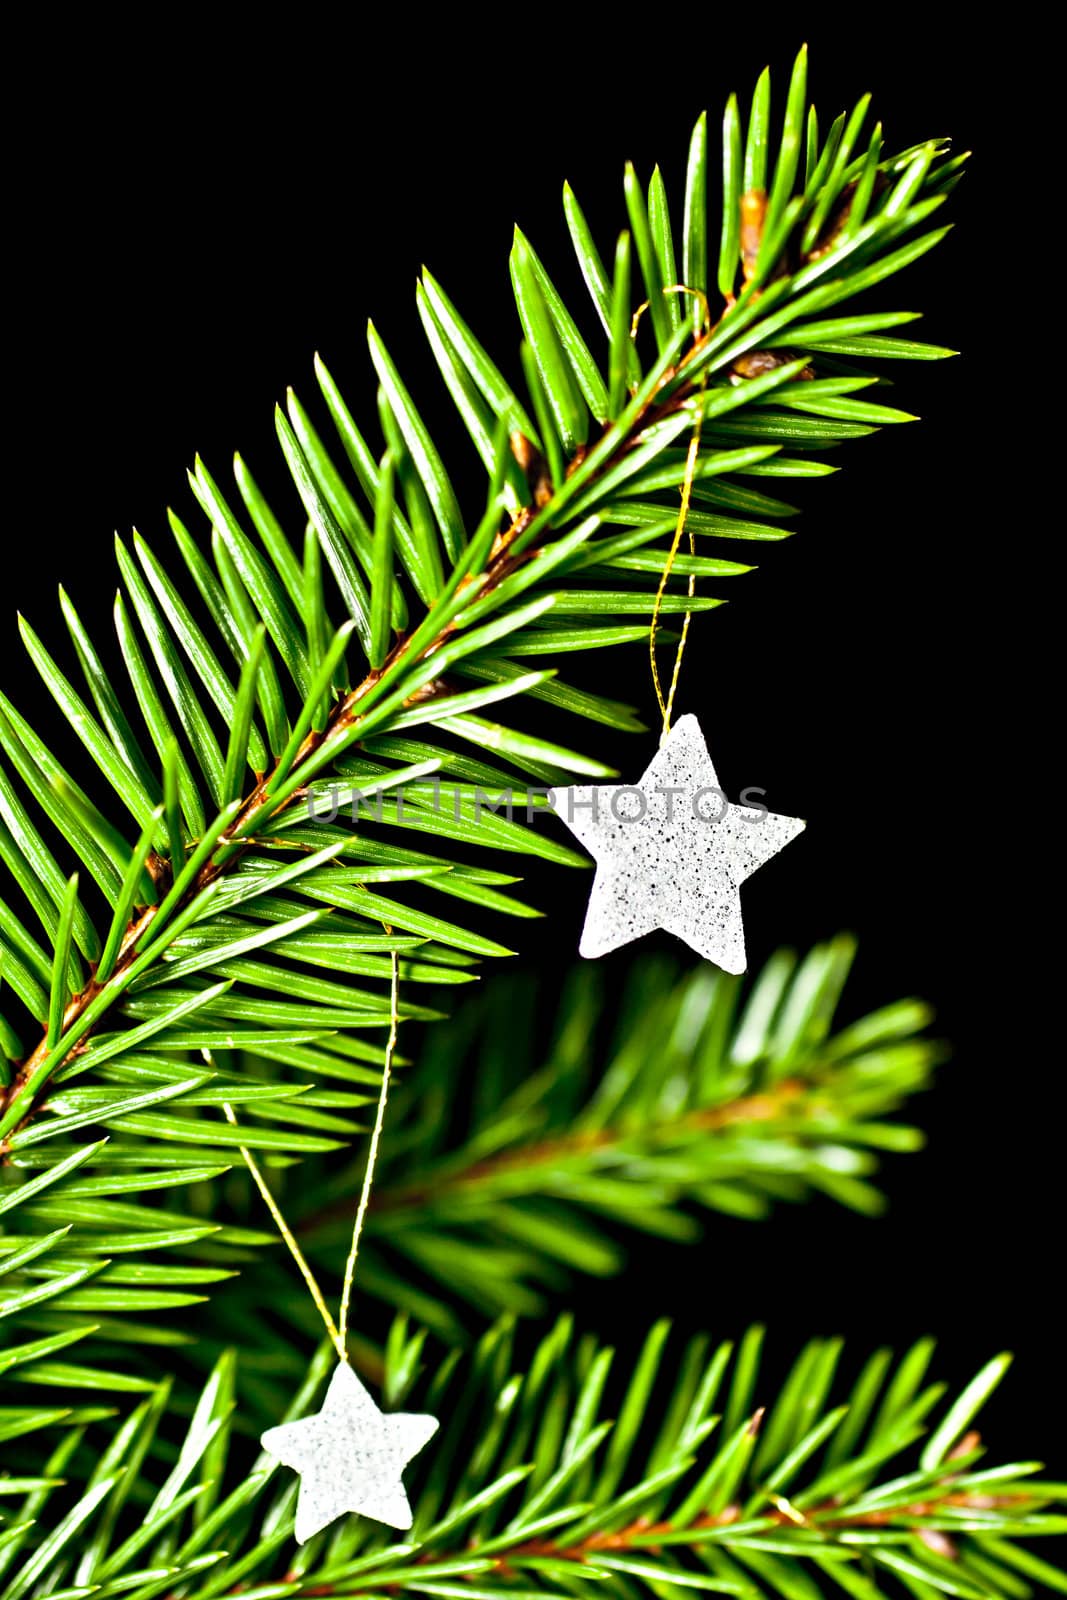 Fir branch with hanging Christmas decorations on a black background.